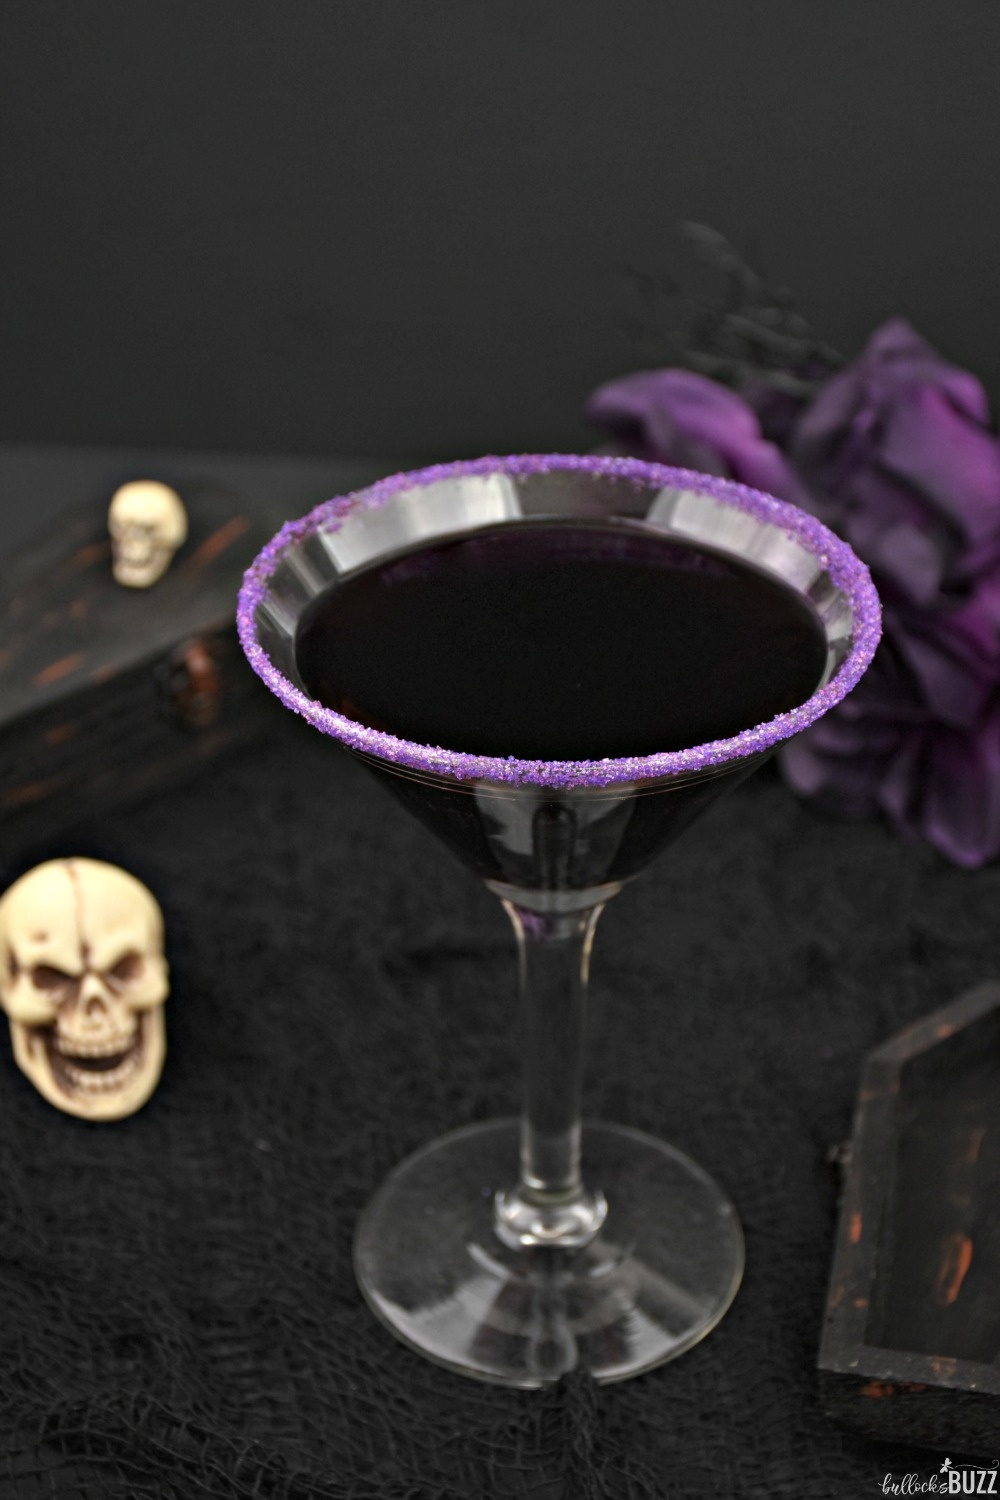 Halloween is one of the best holidays to have fun with festive food and drinks! And this spooky Gravedigger Cocktail for Halloween is no exception! Get the recipe on the Bullock's Buzz blog!